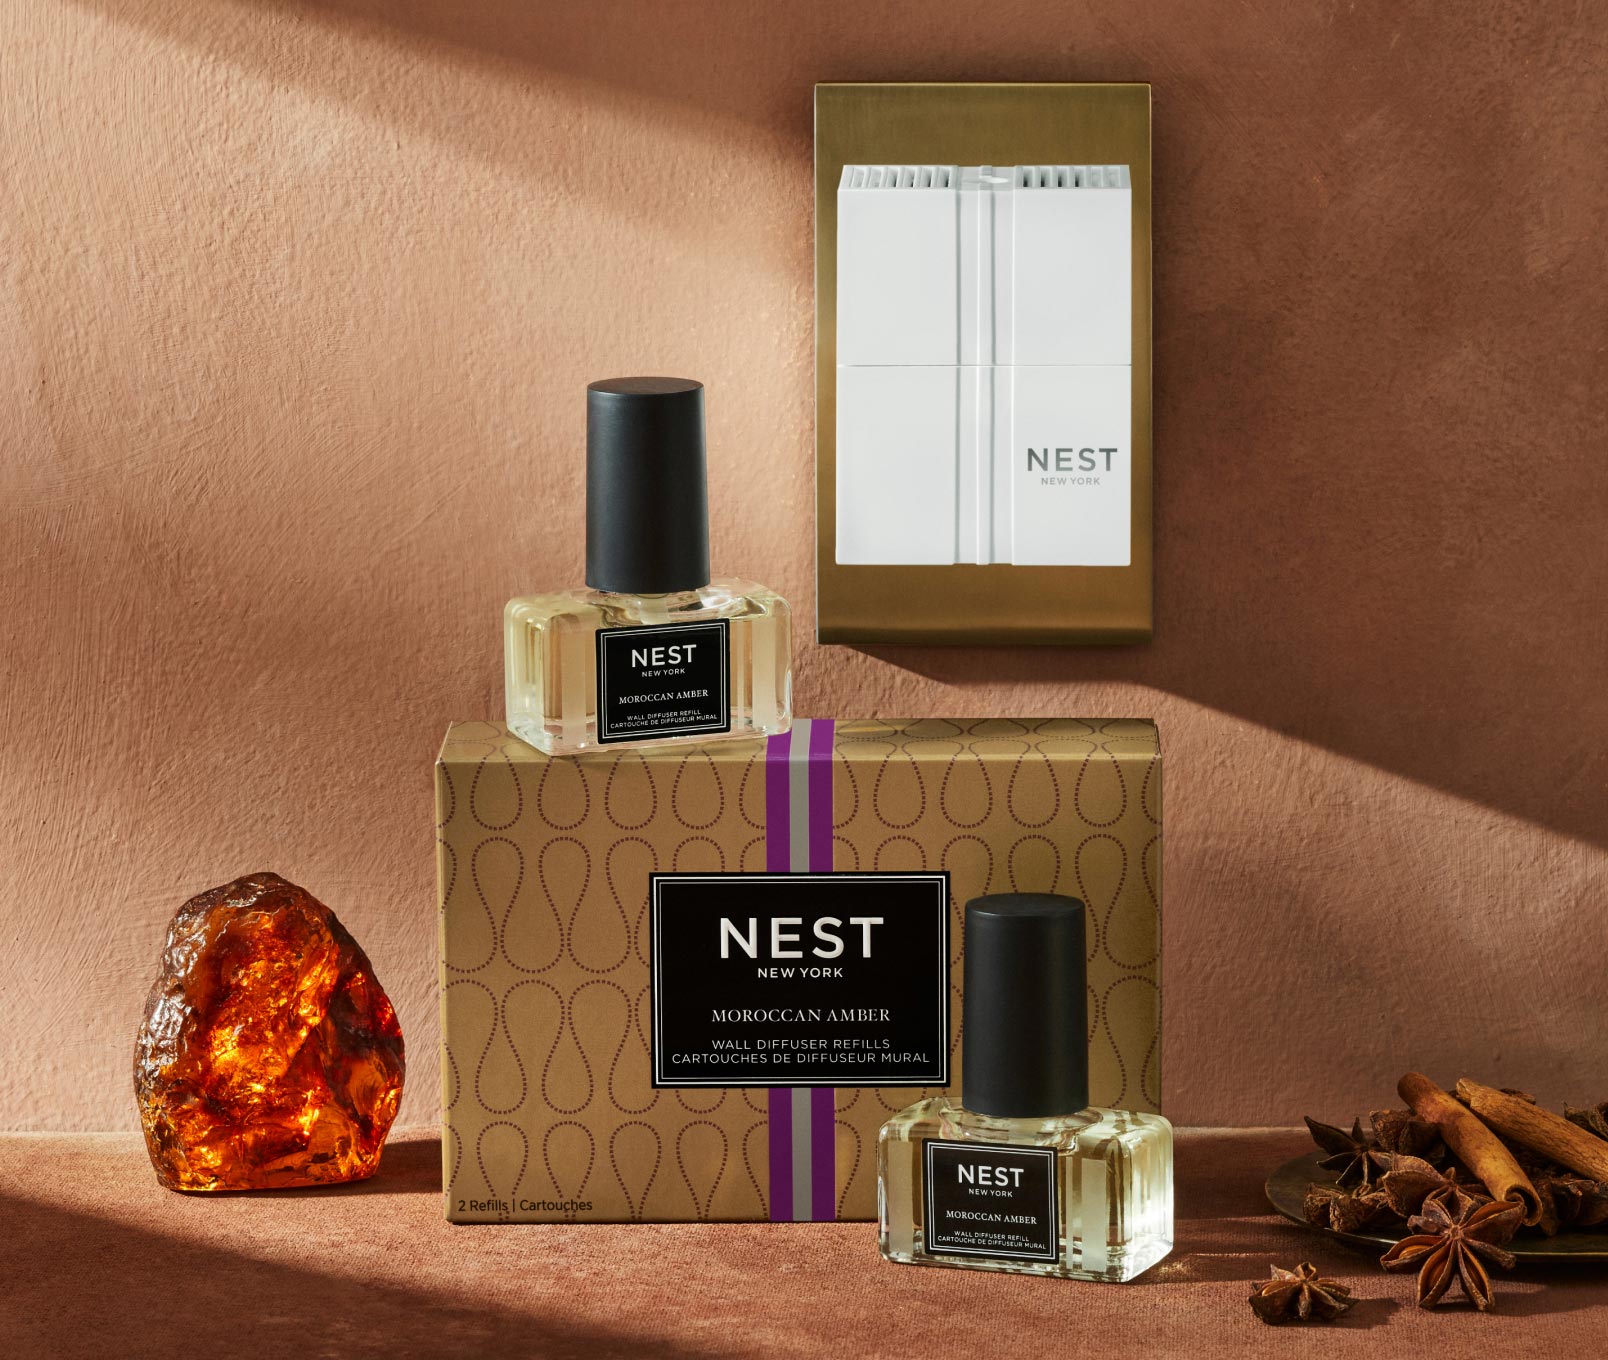 NEST New York Pura Smart Home Fragrance Diffuser - Nest Fine Gifts and  Interiors